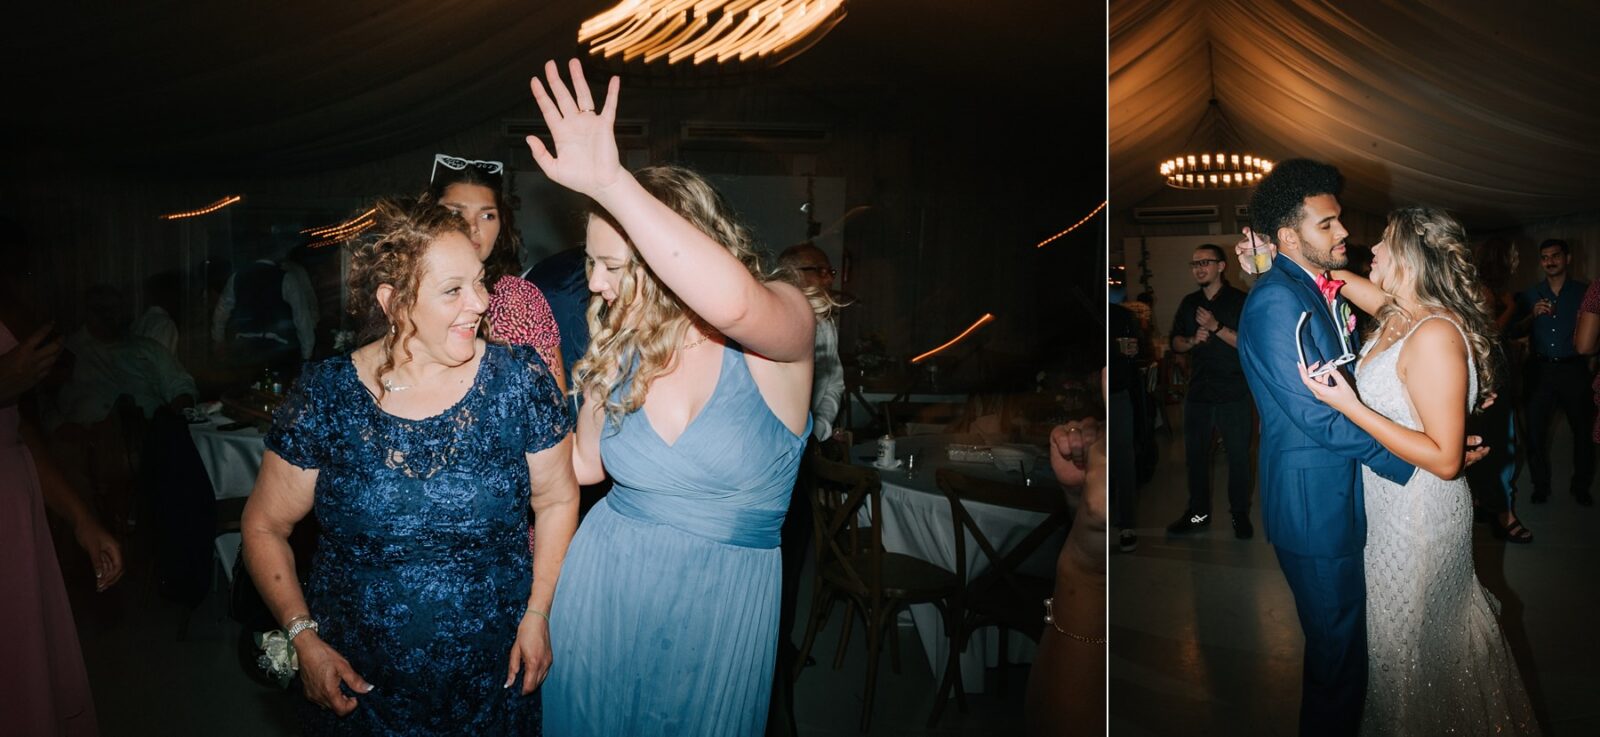 maid of honor dancing with groom's mom and wedding reception in austin texas